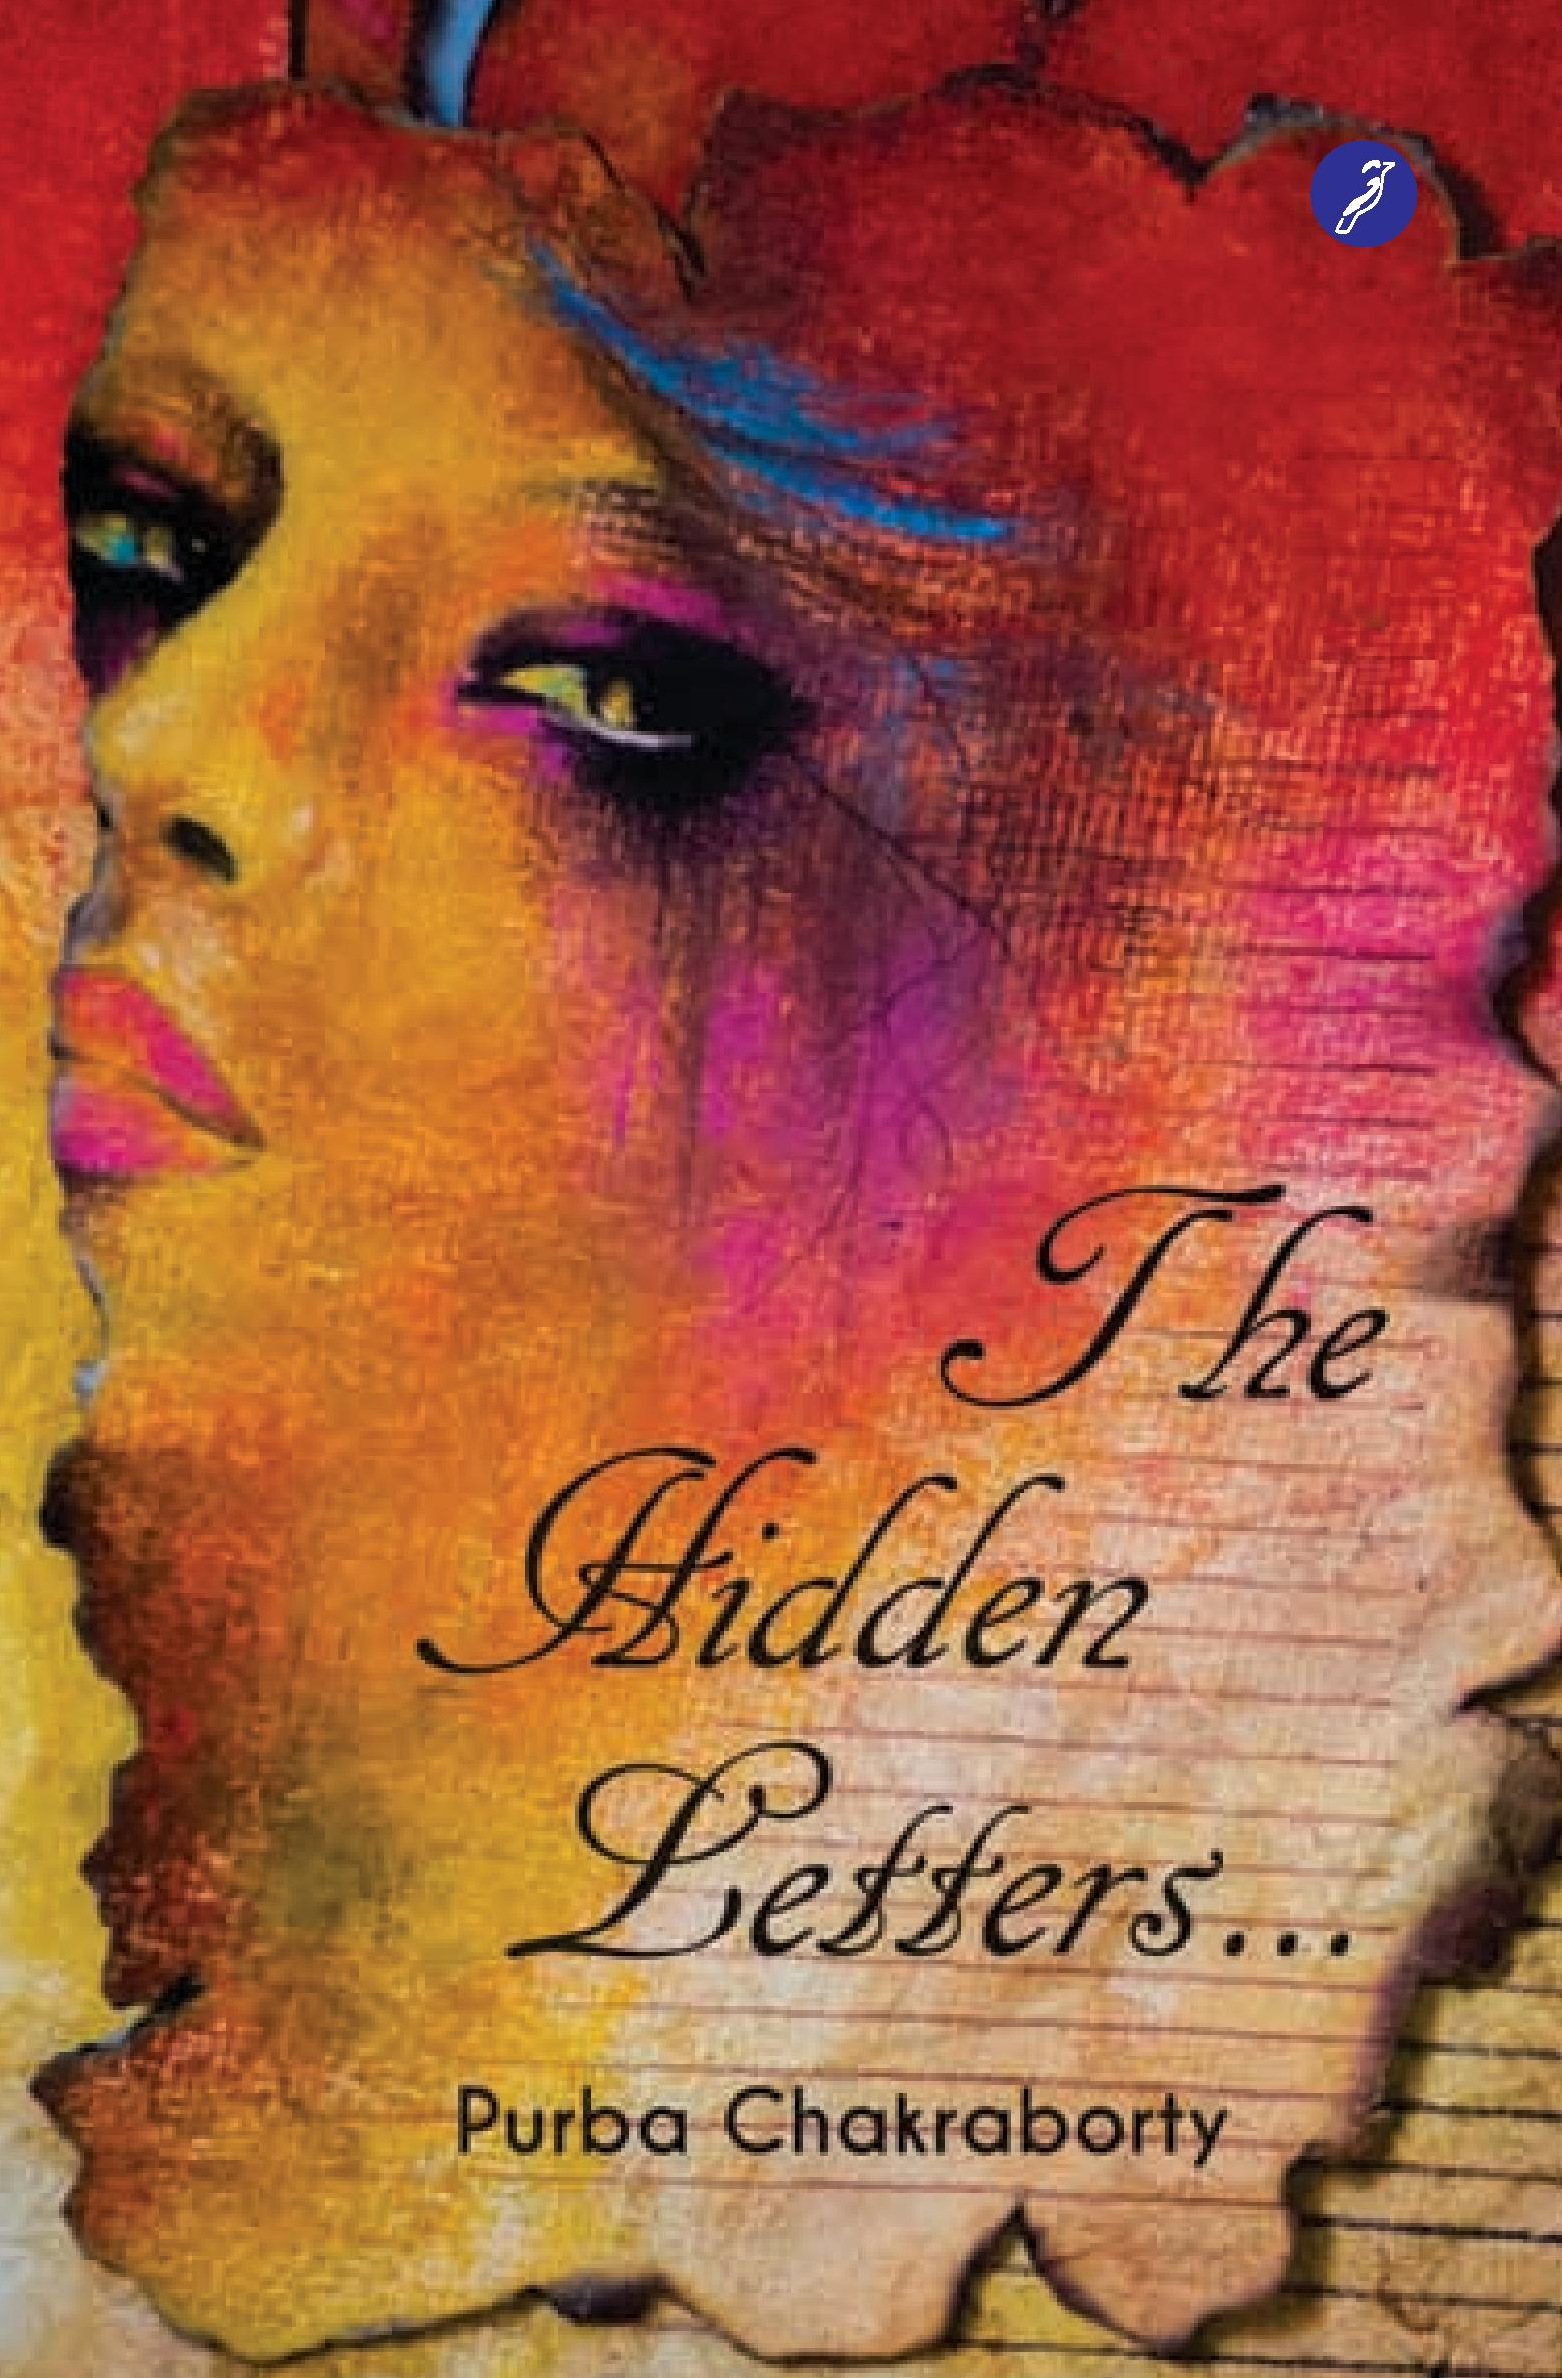 The Hidden Letters